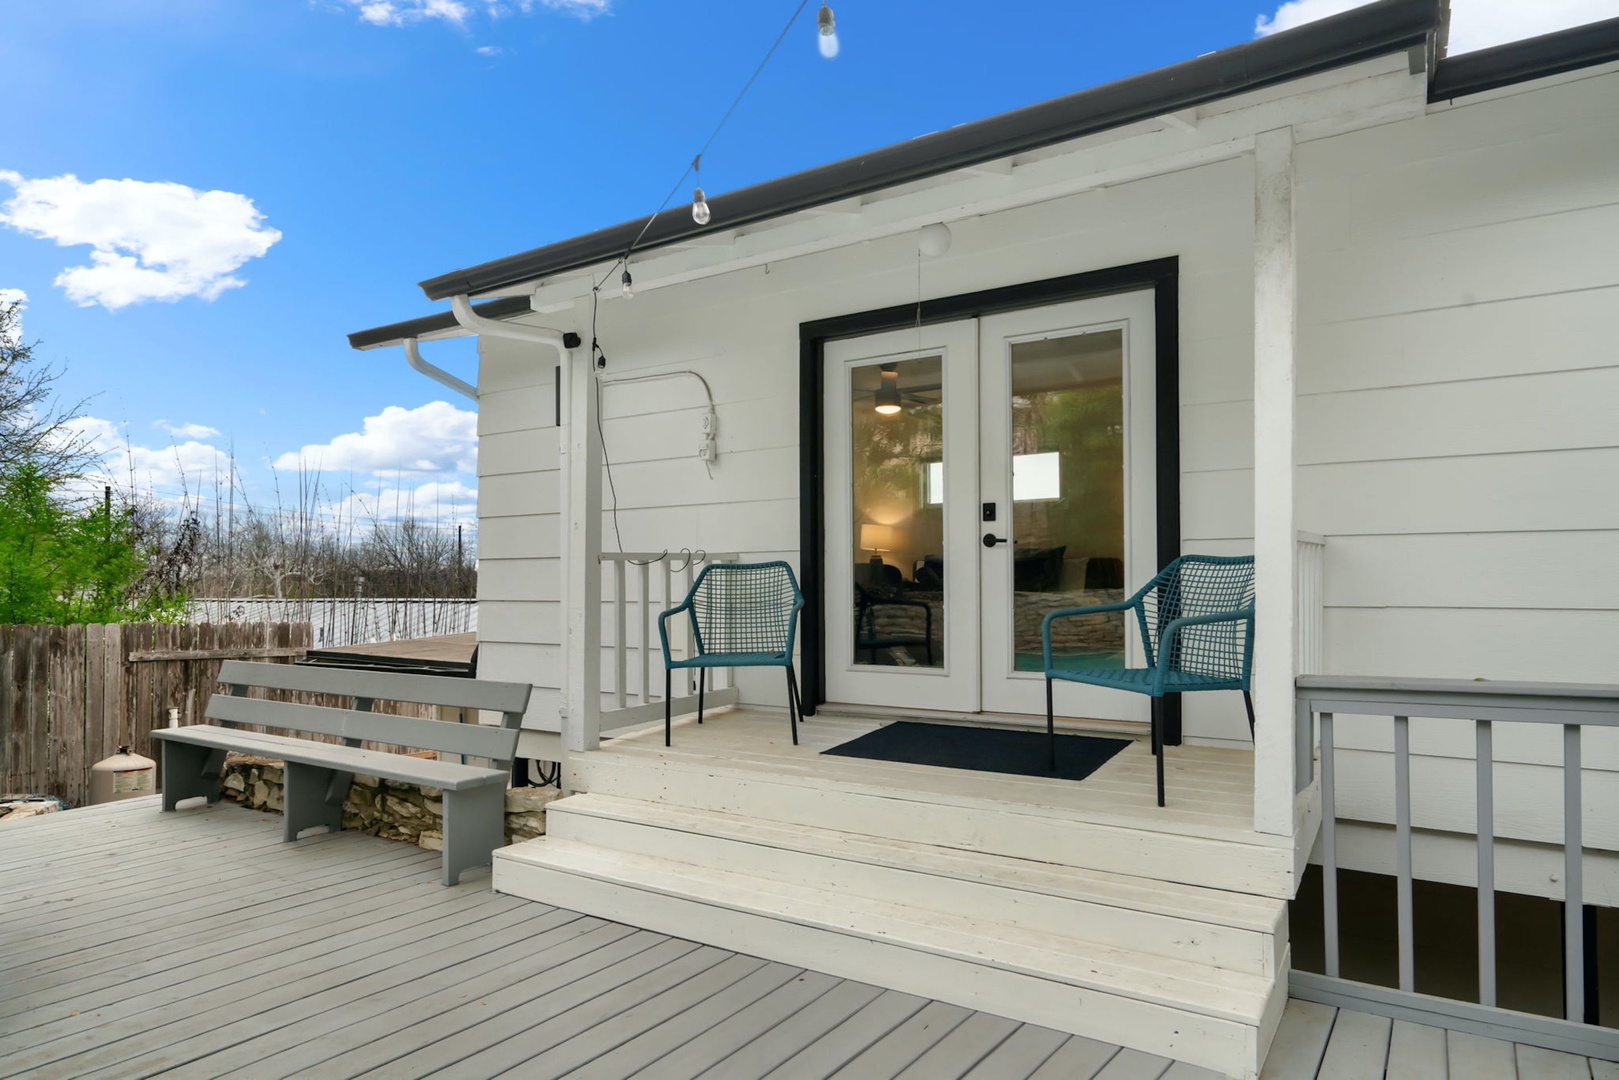 Take in the fresh air while you relax on the spacious back deck